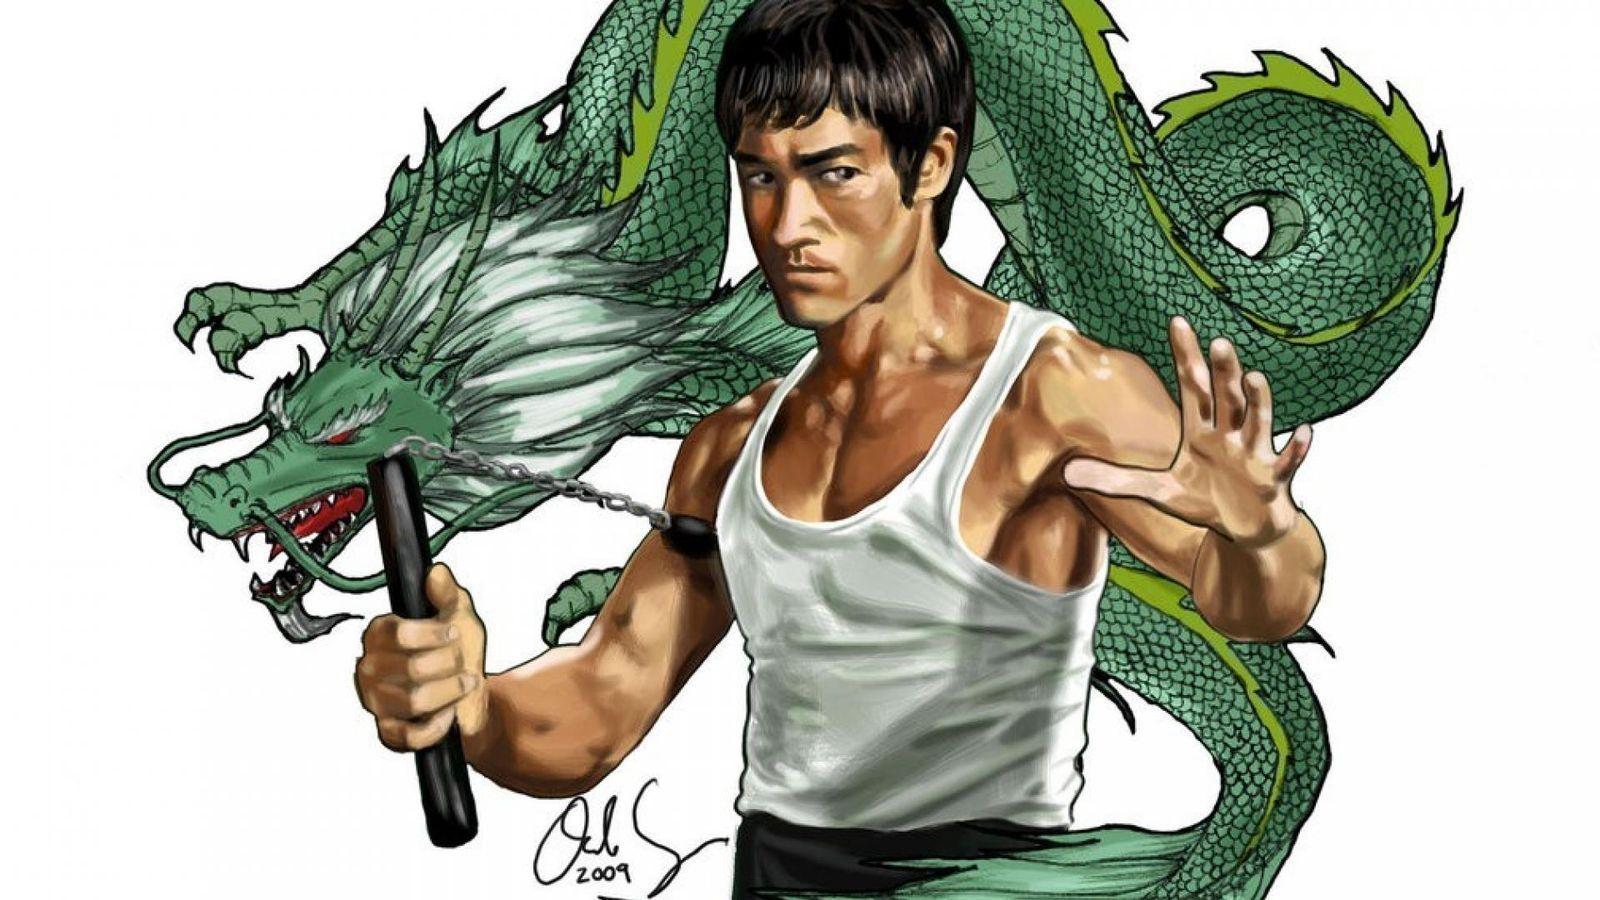 Bruce Lee HD Wallpaper for Free Download on MoboMarket 1600×900